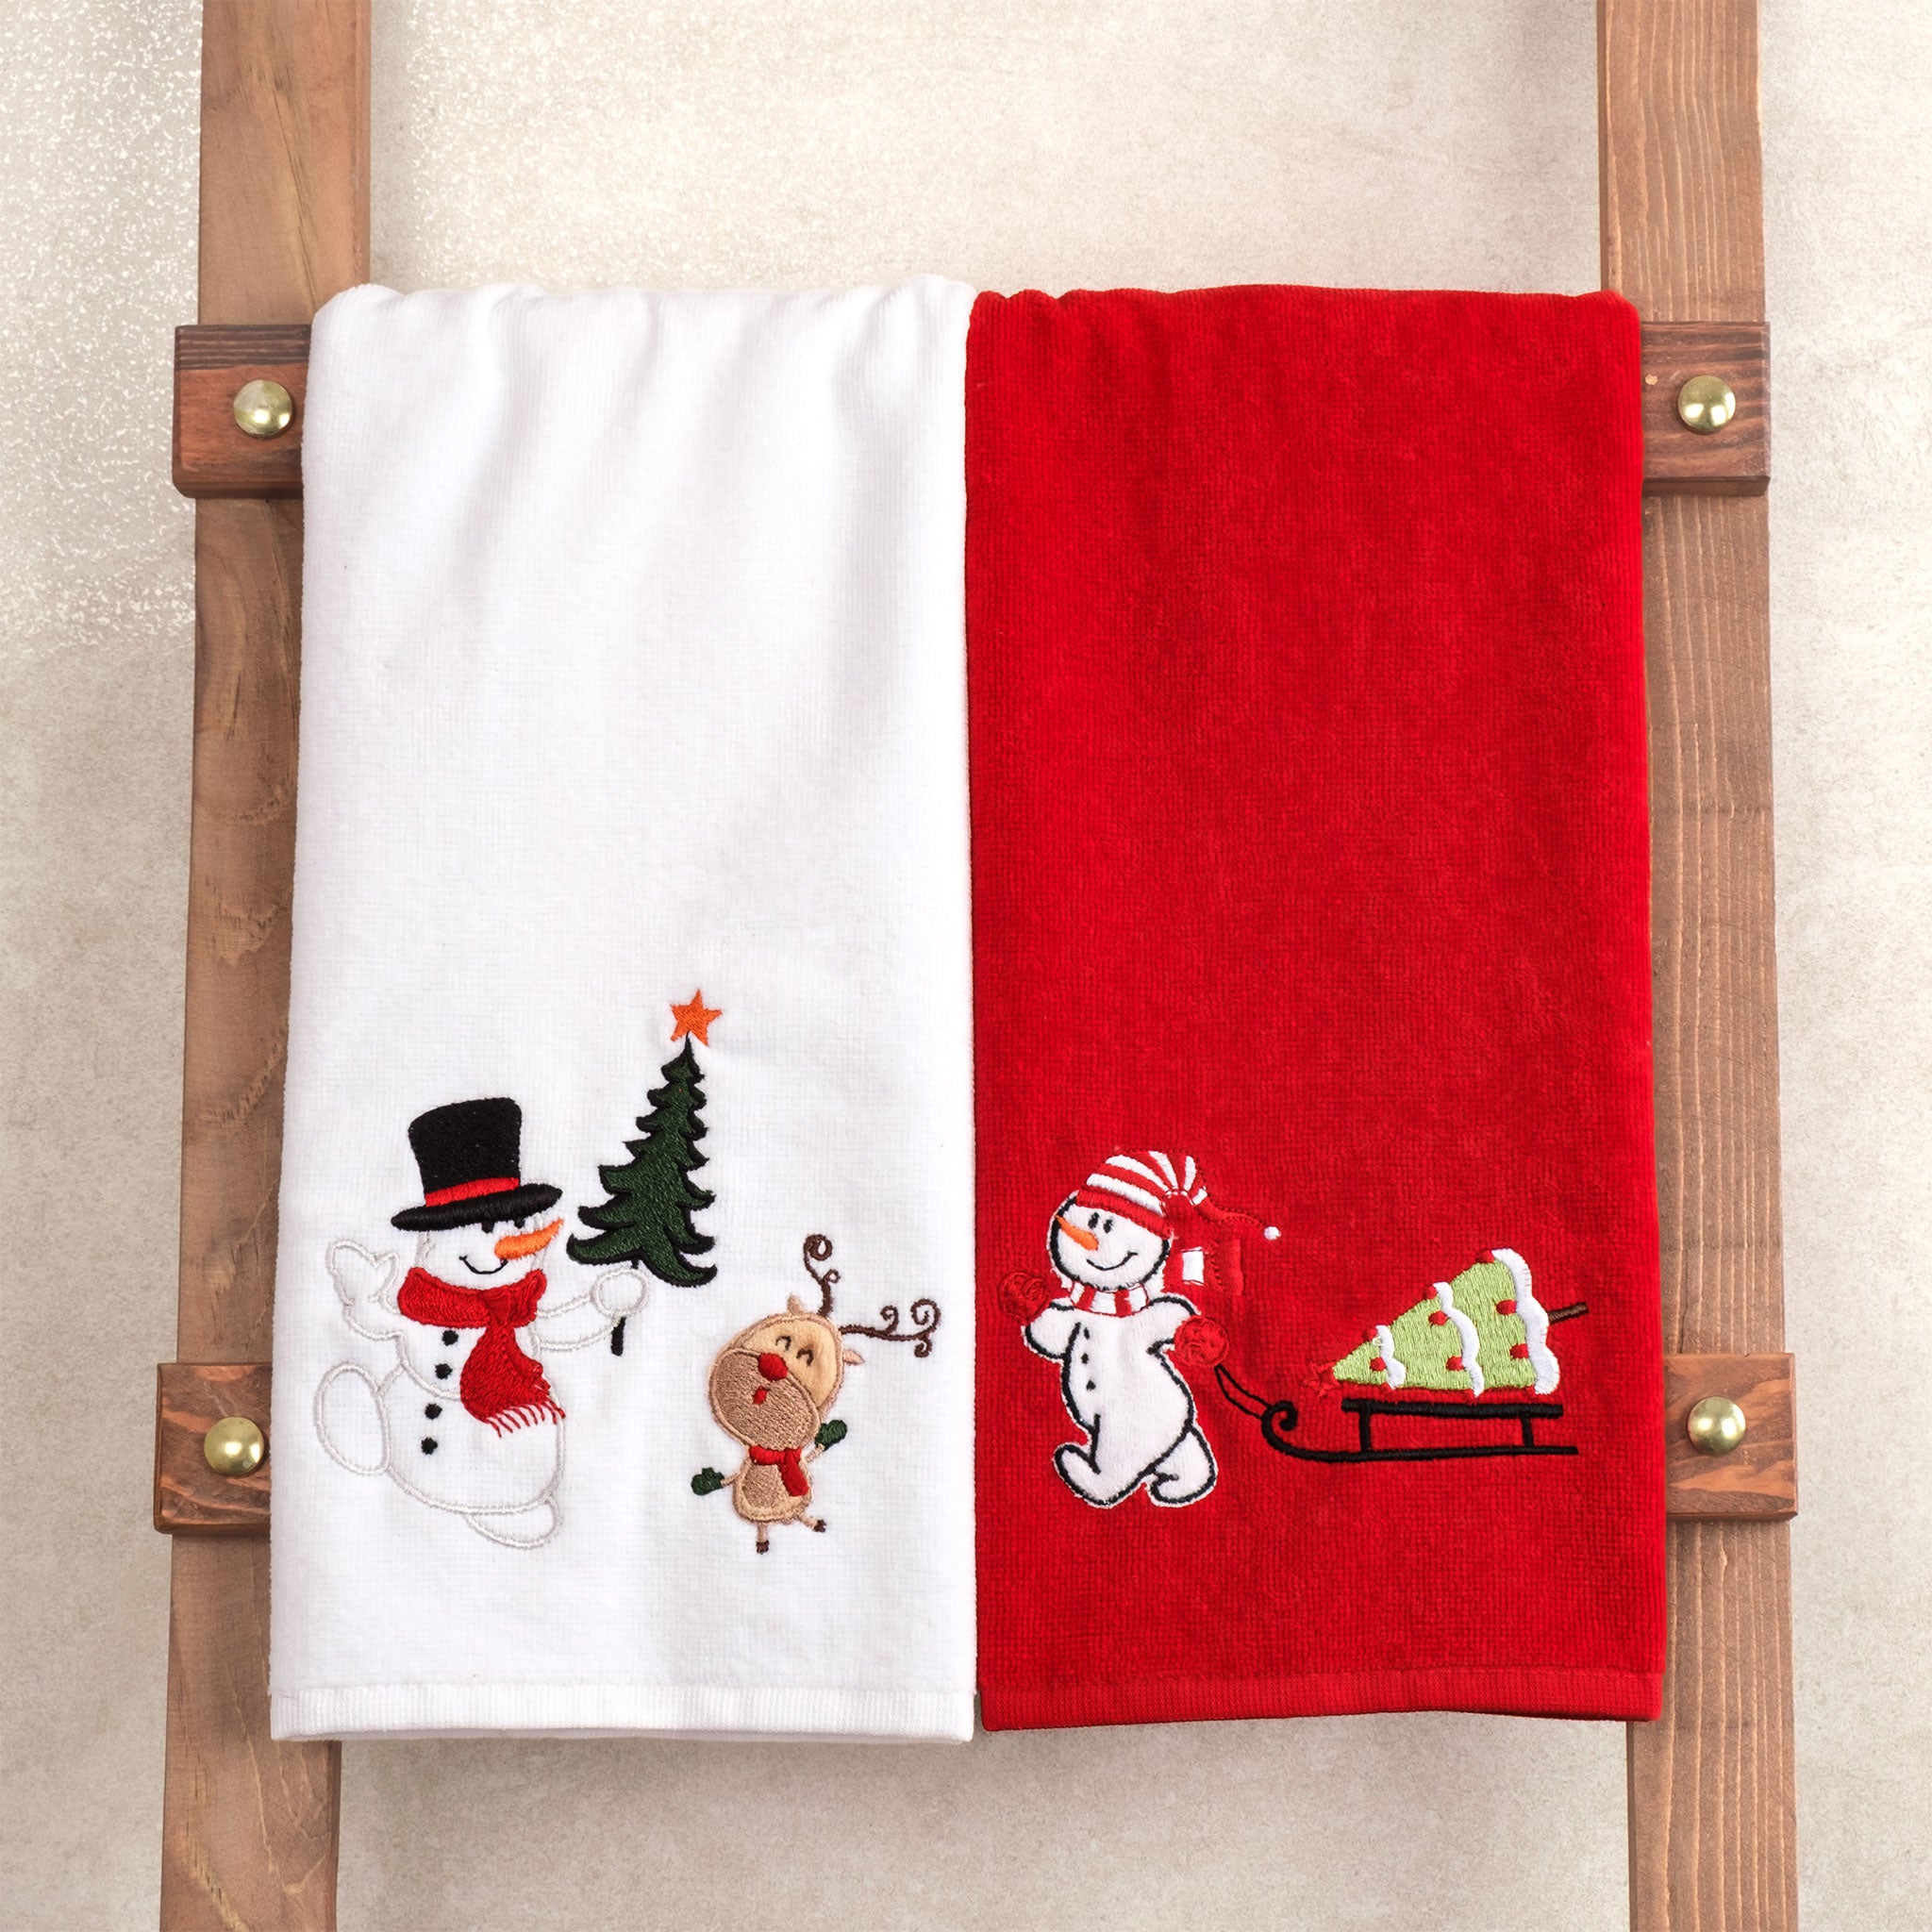 American Soft Linen - Christmas Towels 2 Packed Embroidered Towels for Decor Xmas - Snowmen - 6